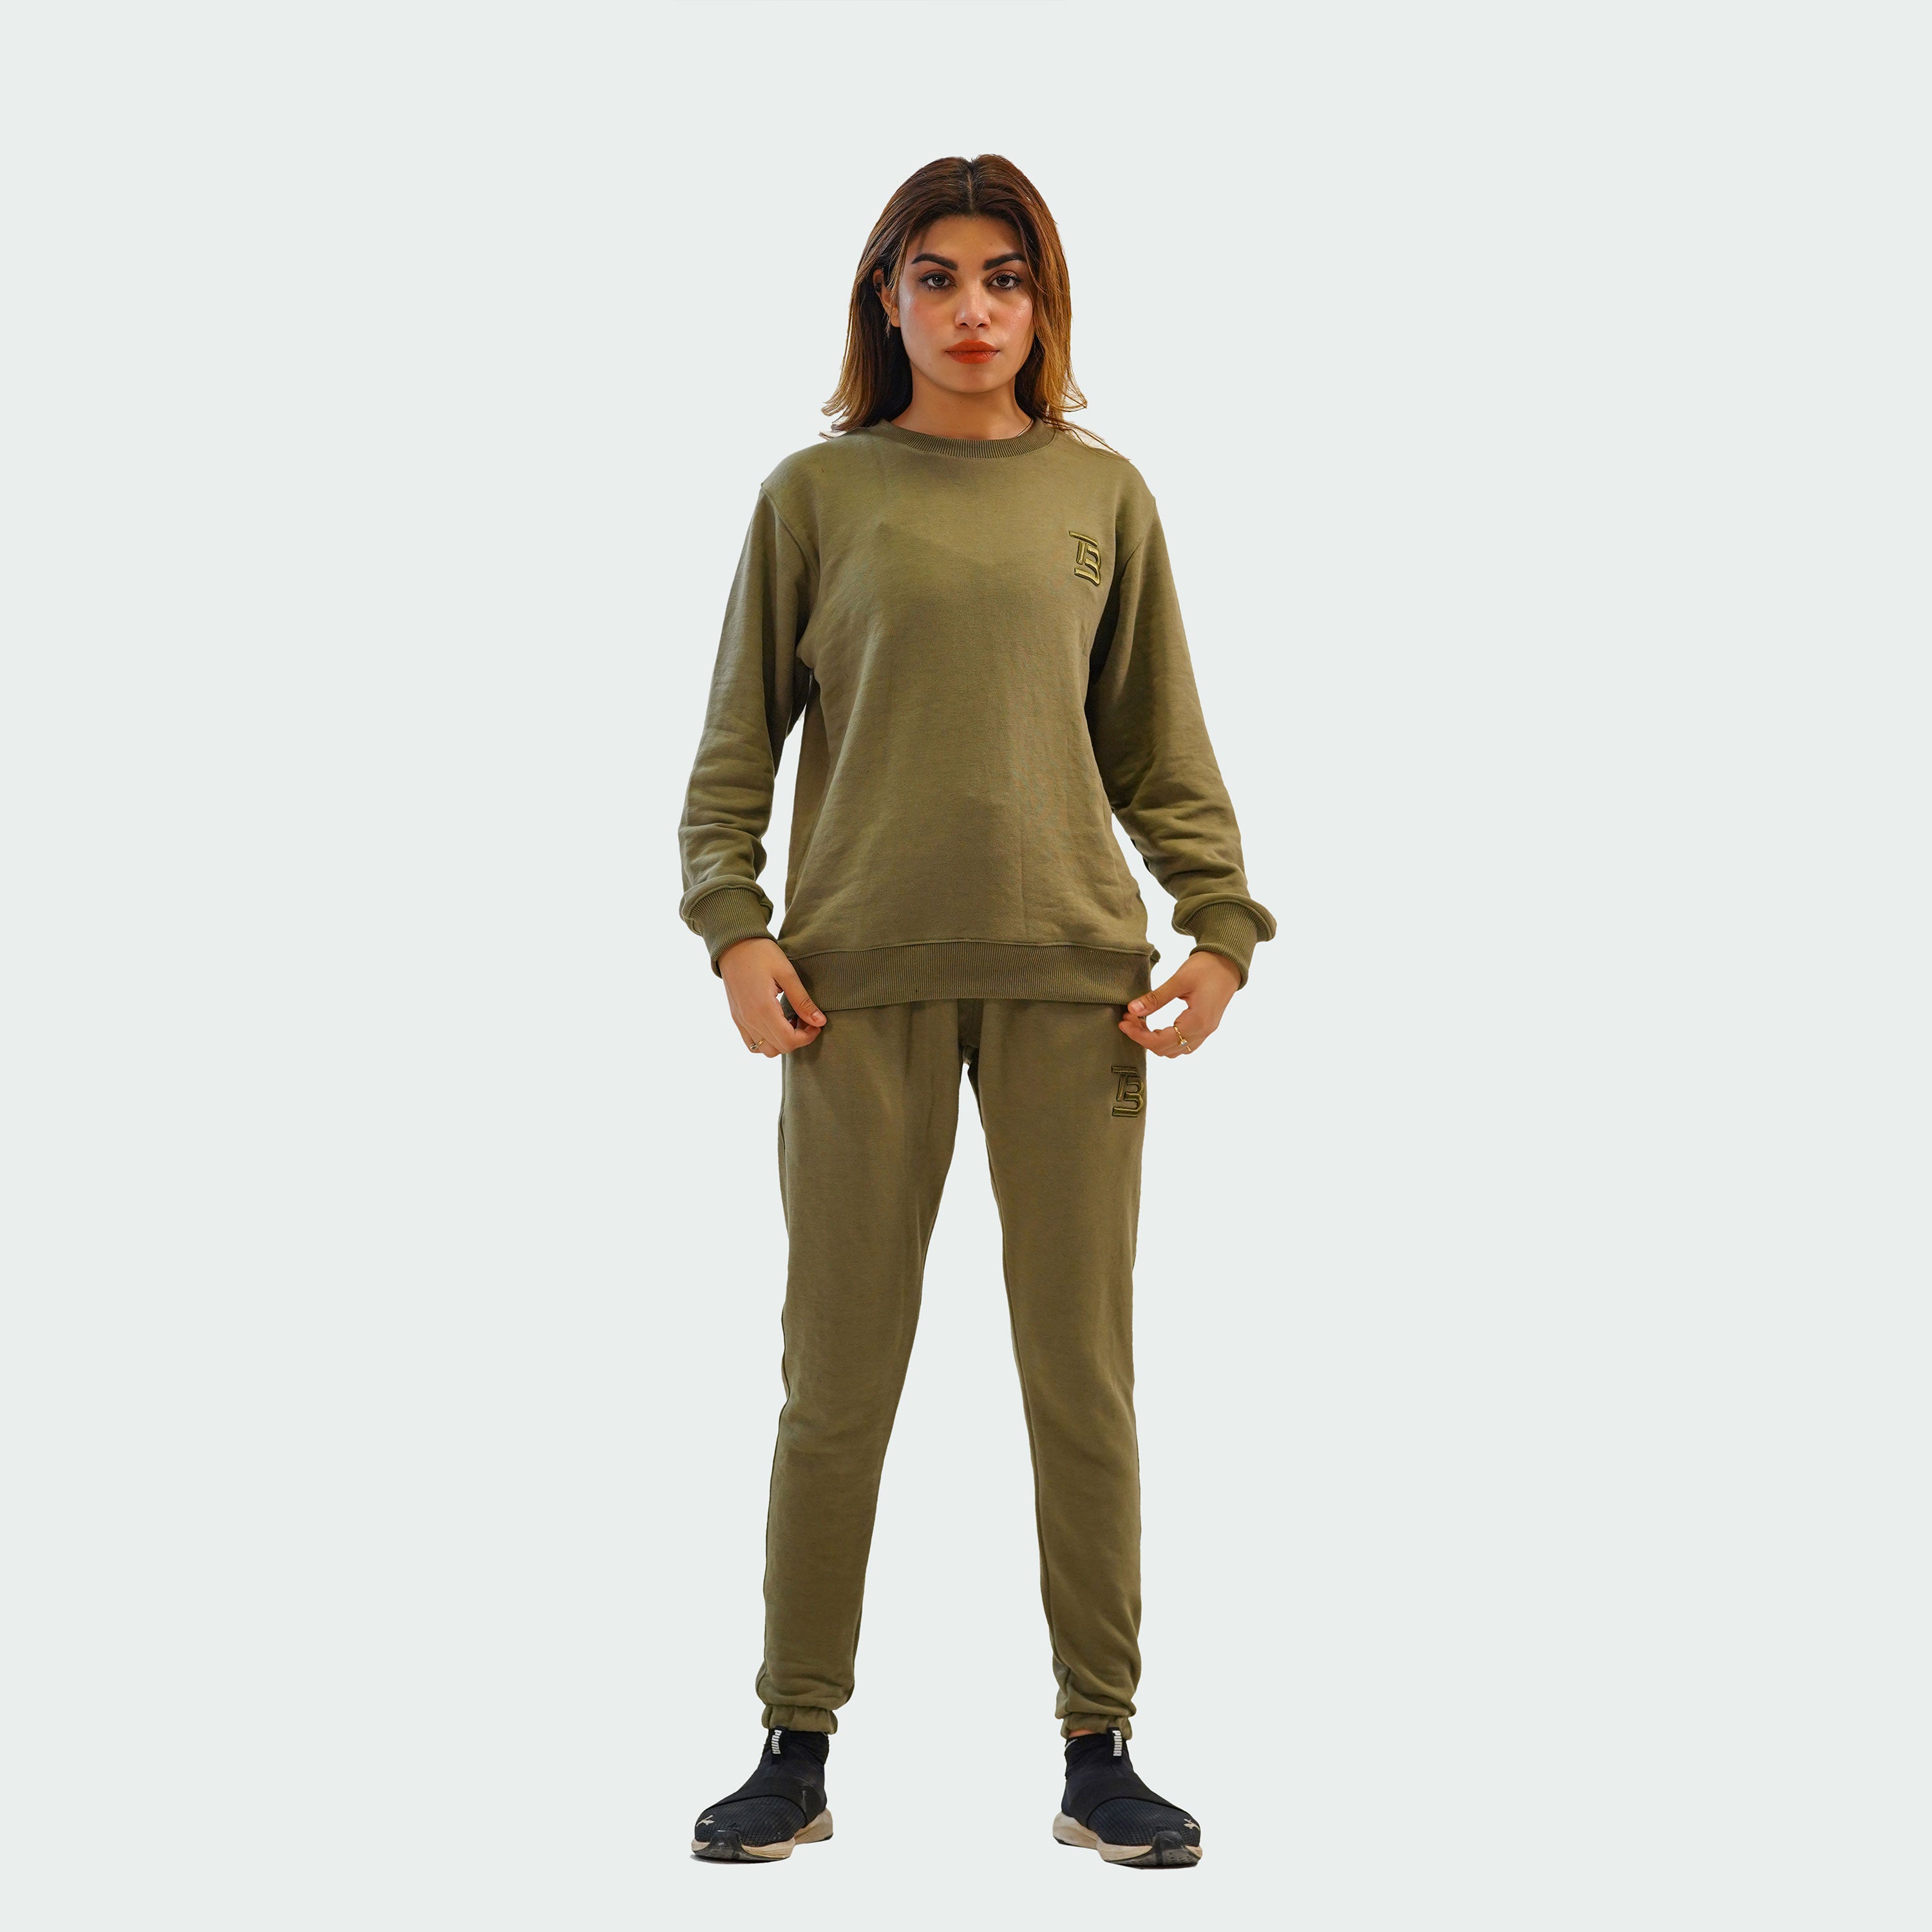 Cozy Unisex Athletic Wear - Olive Green